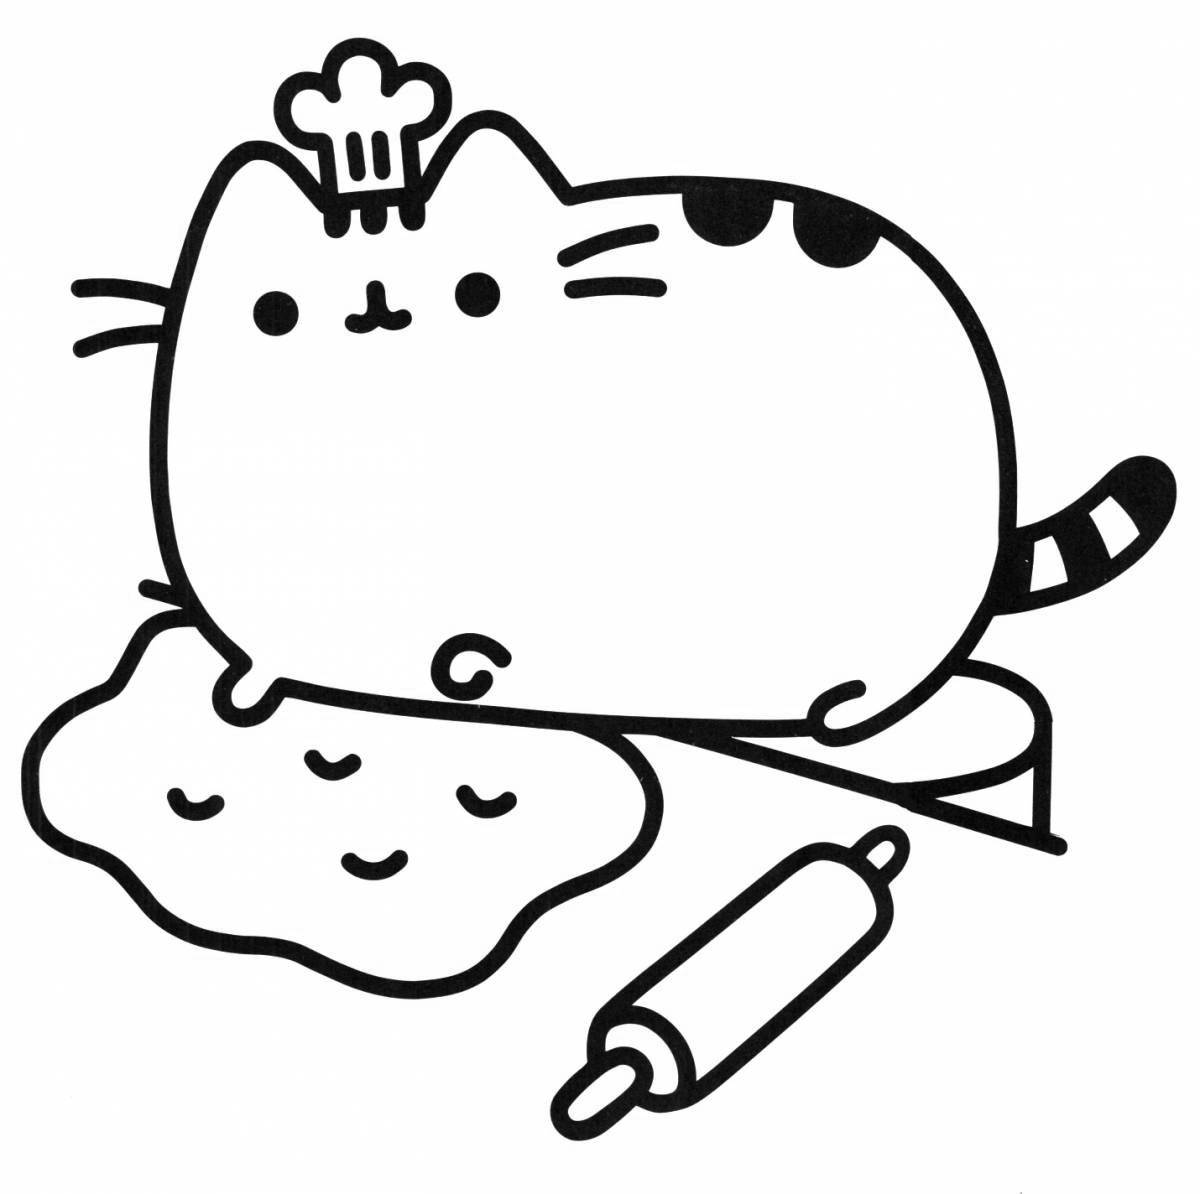 Zany sushi cat coloring page